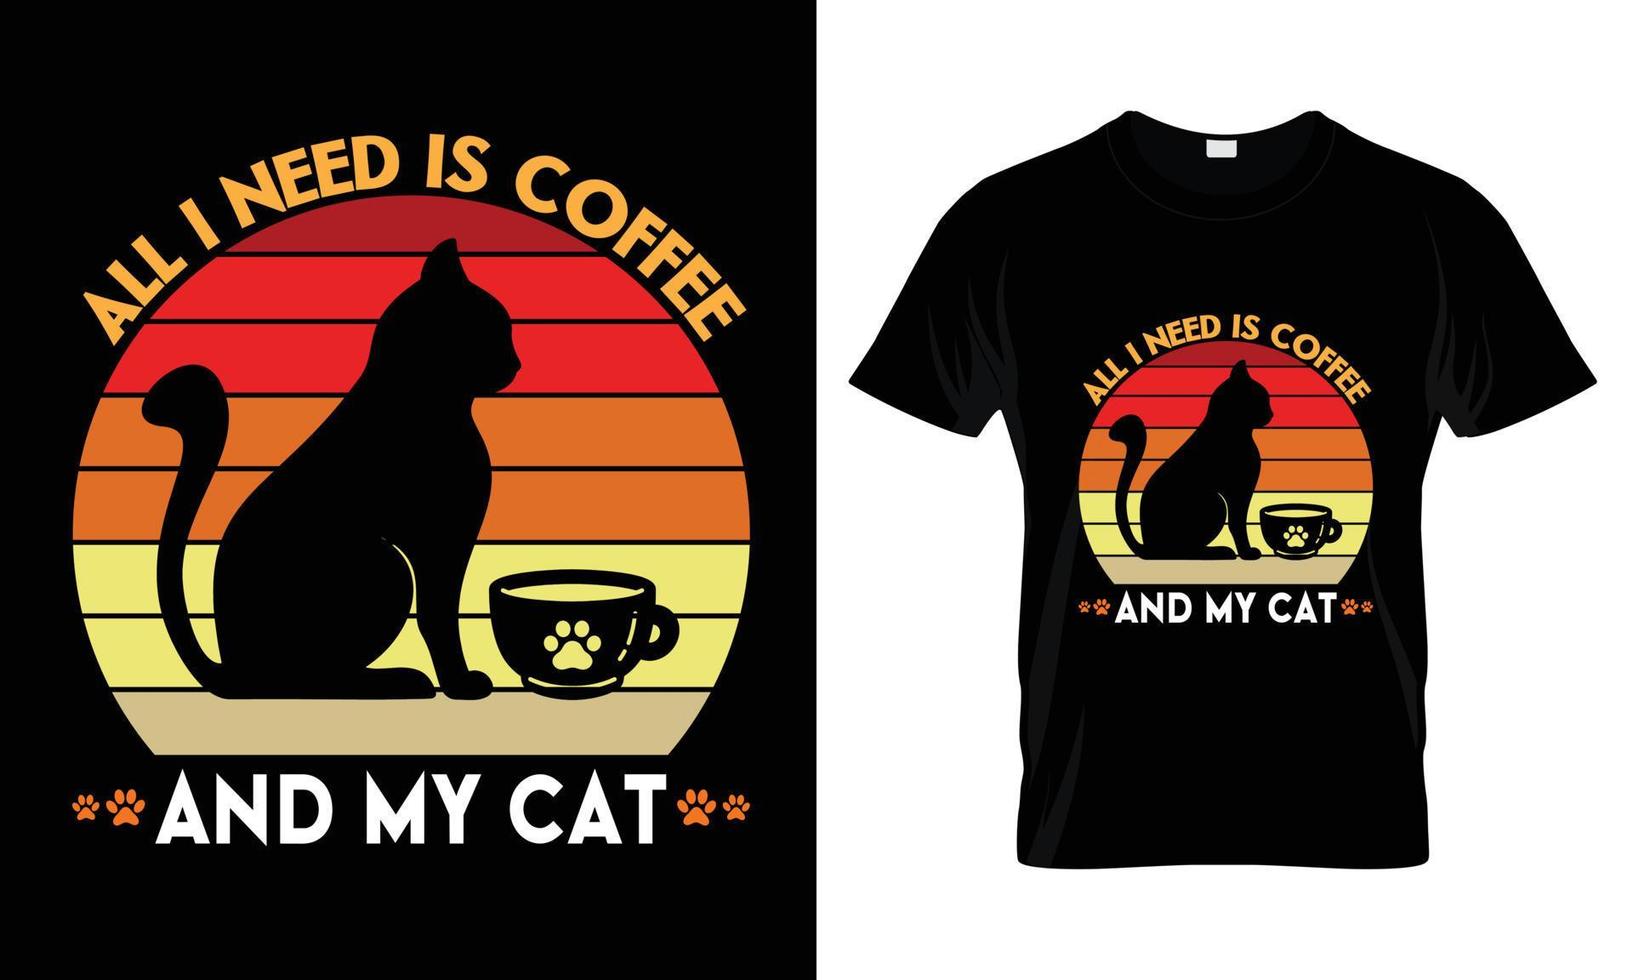 All I need is Coffee and my cat t shirt design vector